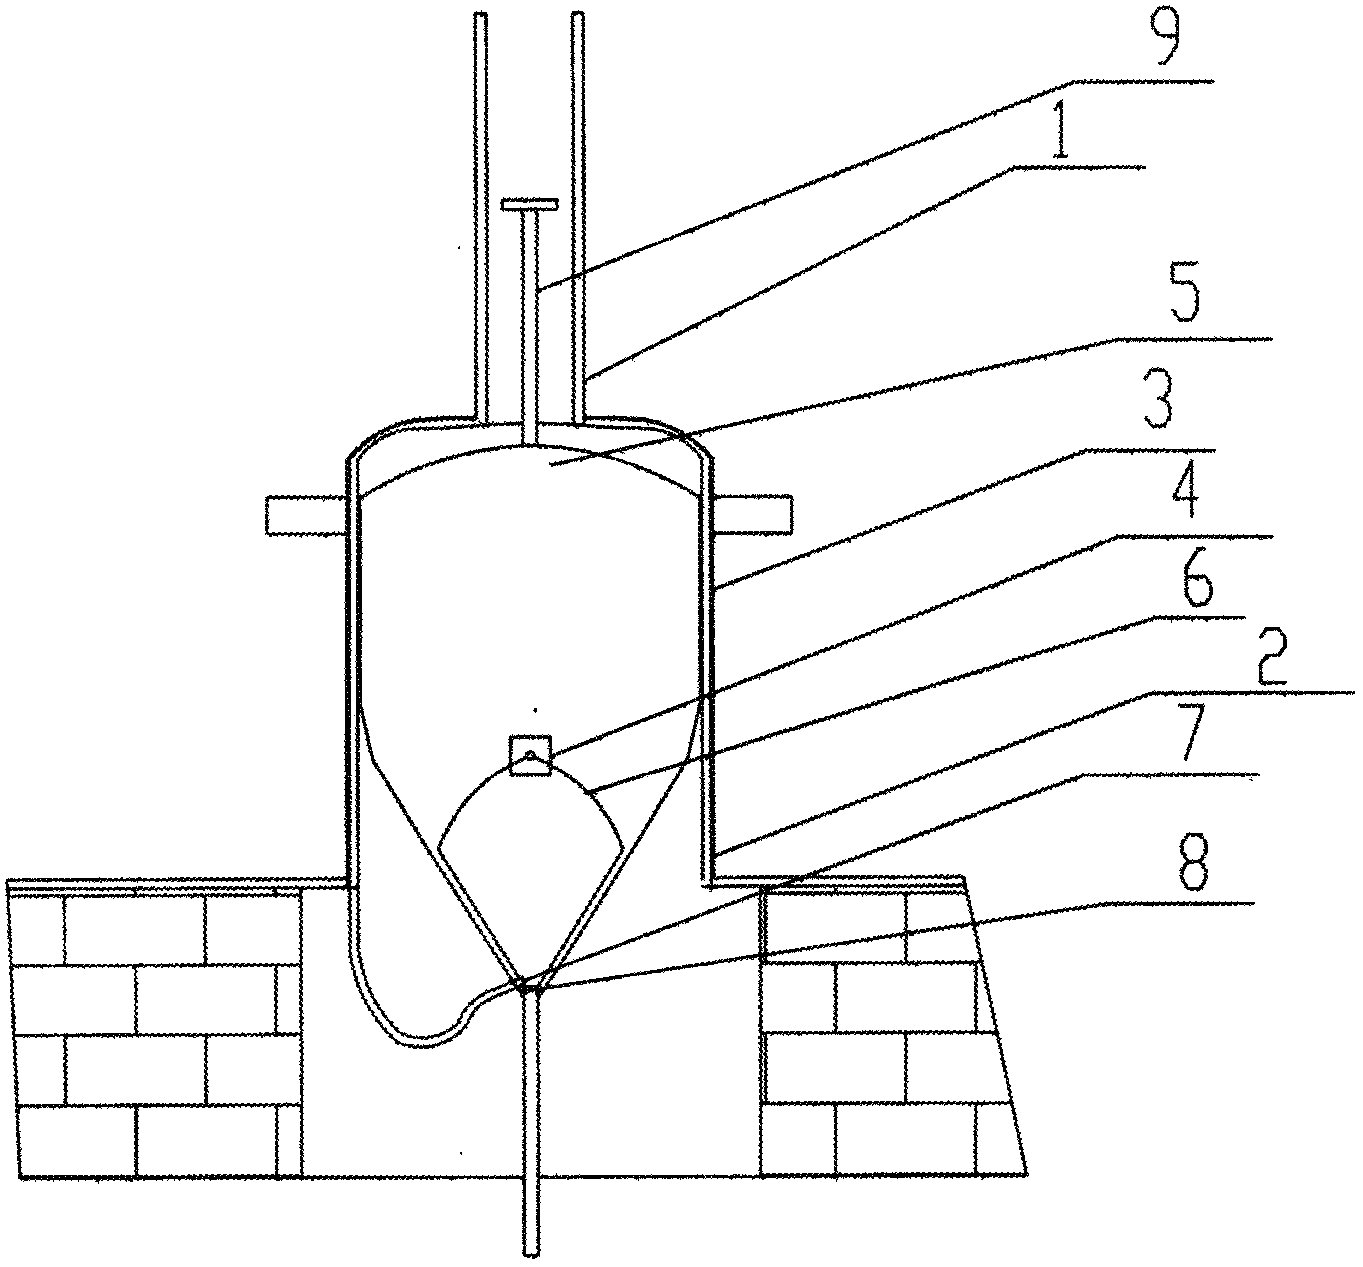 Automatically opened and closed flat-bottom valve gate